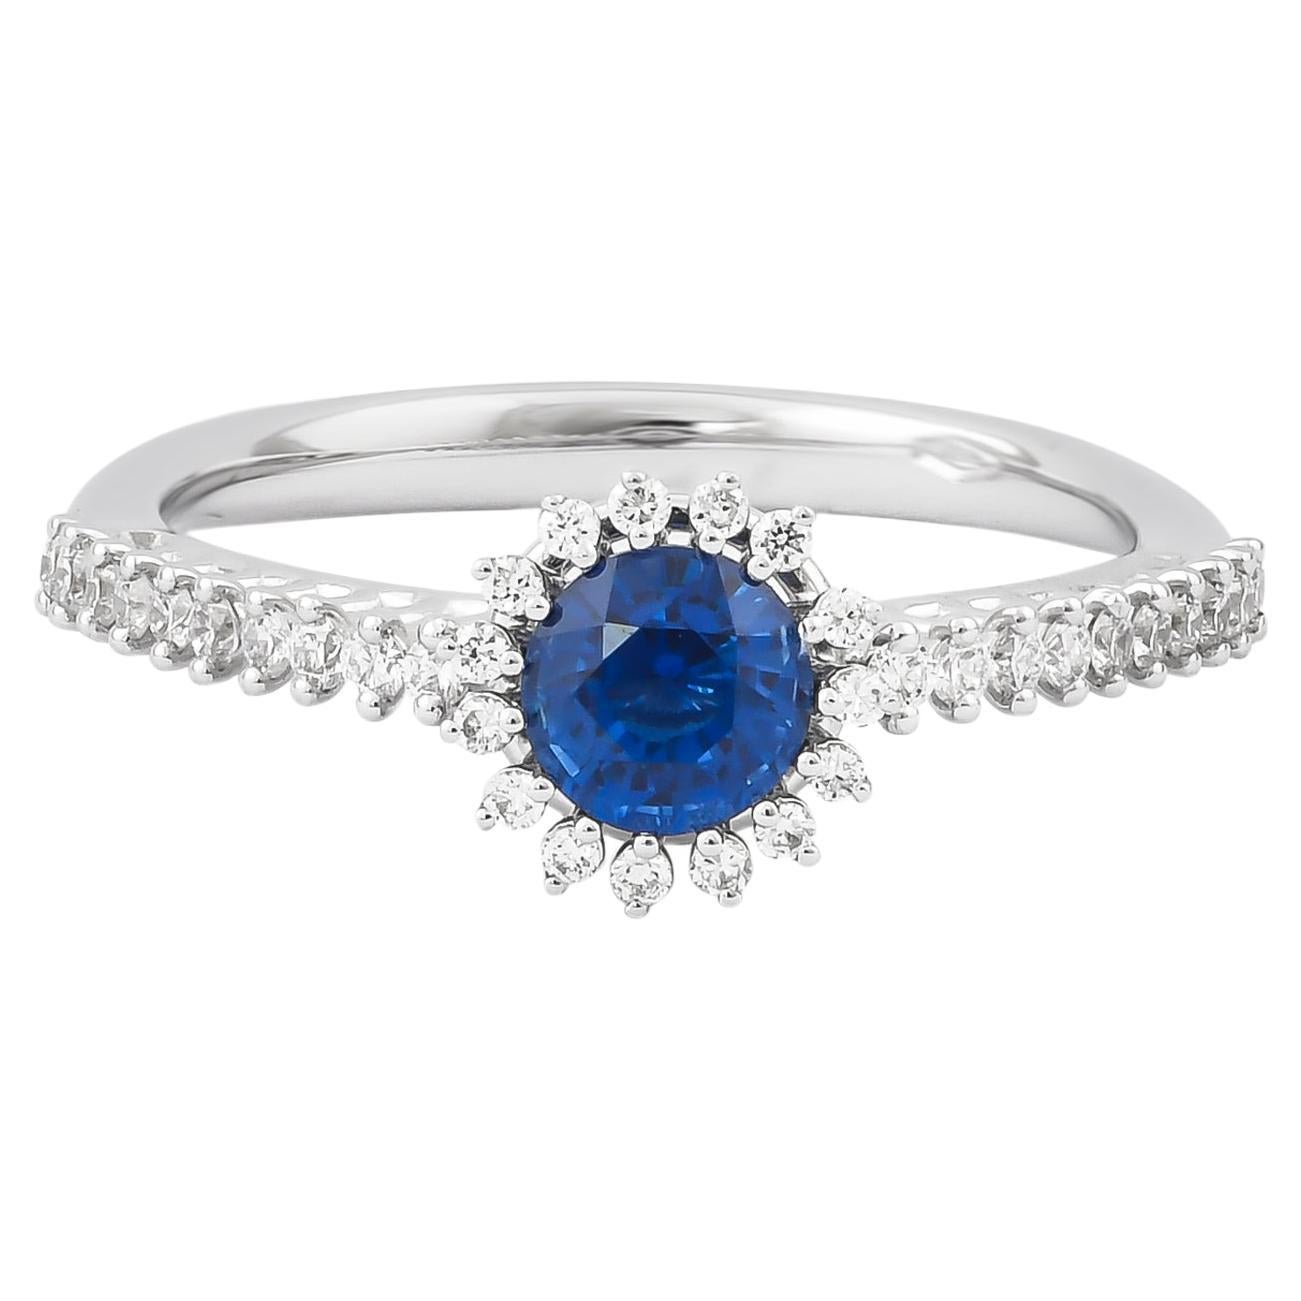 0.73 Carat Blue Sapphire Ring in 18 Karat White Gold For Sale